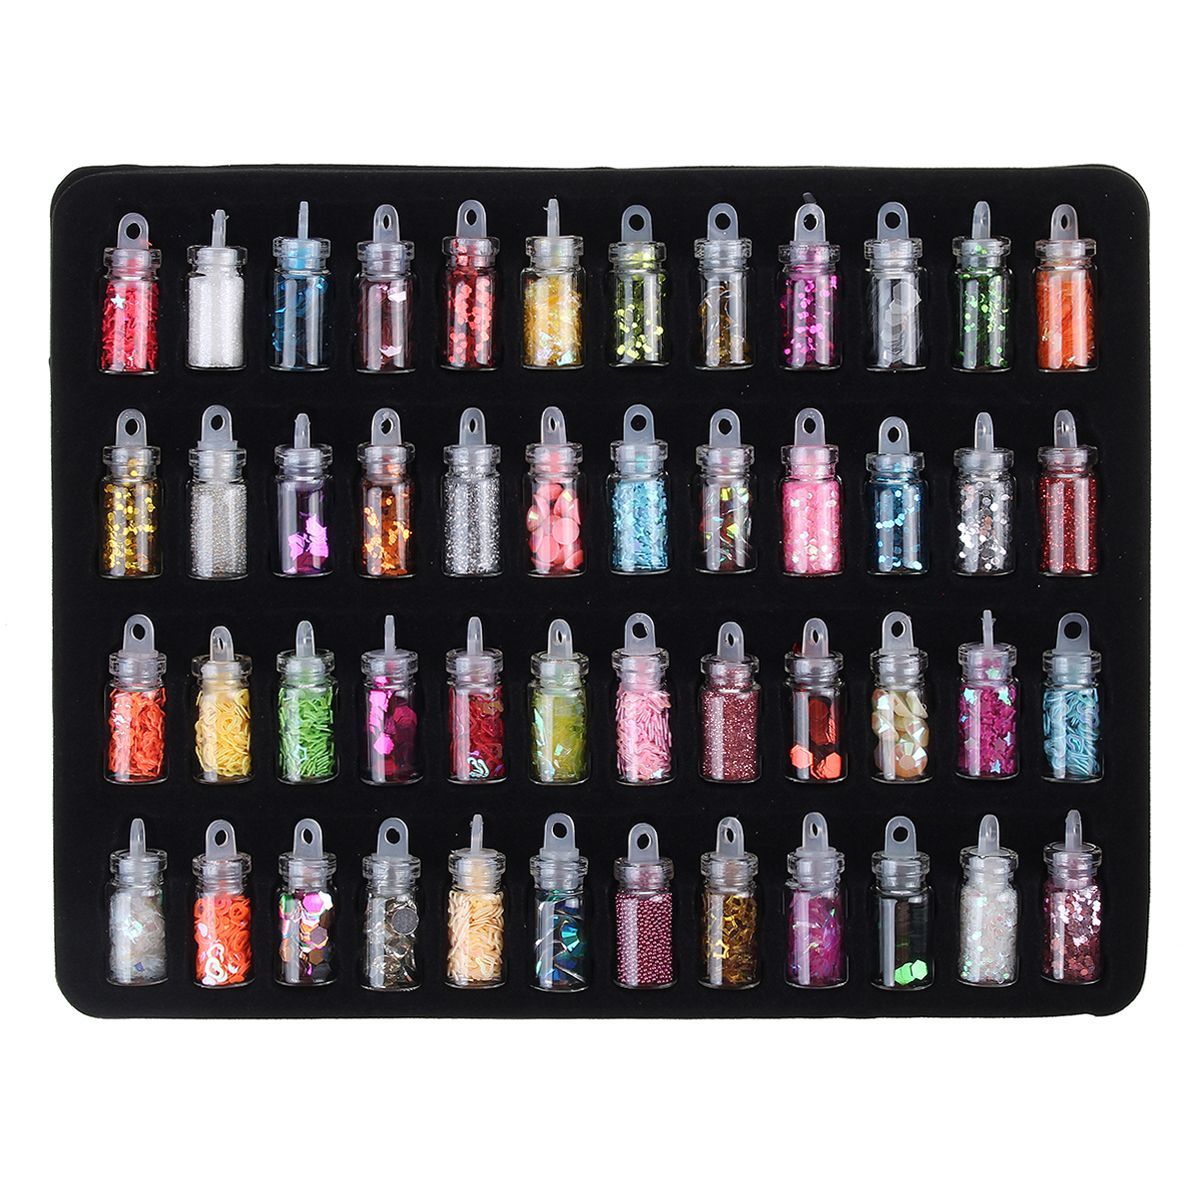 184Pcs-Resin-Casting-Mold-Silicone-DIY-Mold-Jewelry-Pendant-Mould-Making-Craft-Kit-1761600